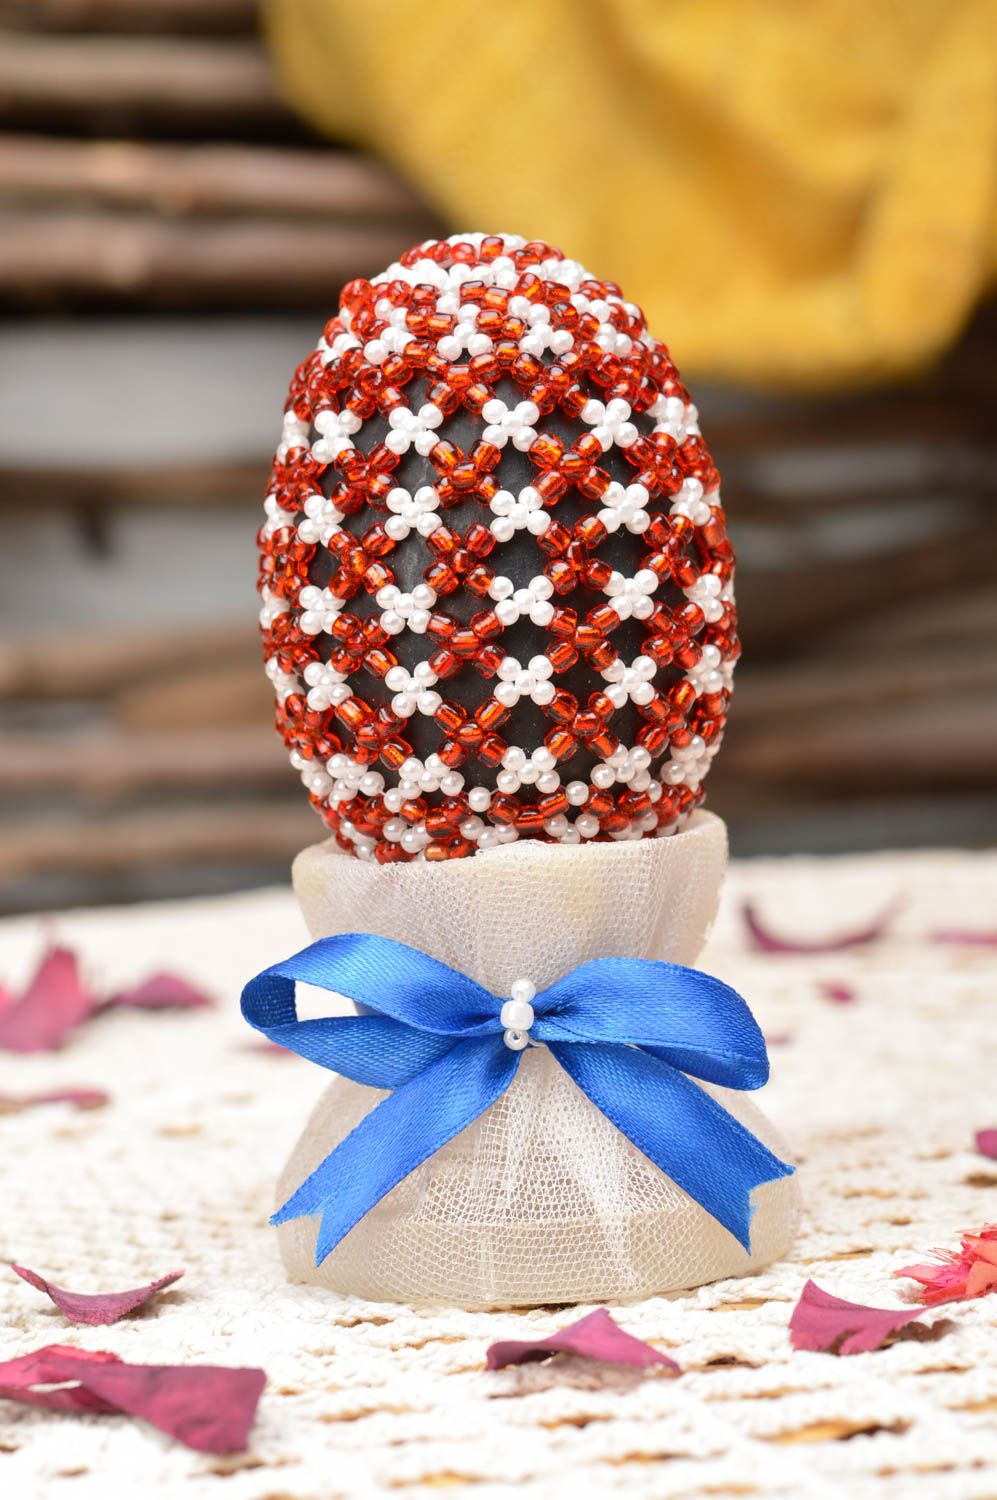 Red and white handmade papier mache egg woven over with beads on holder photo 1